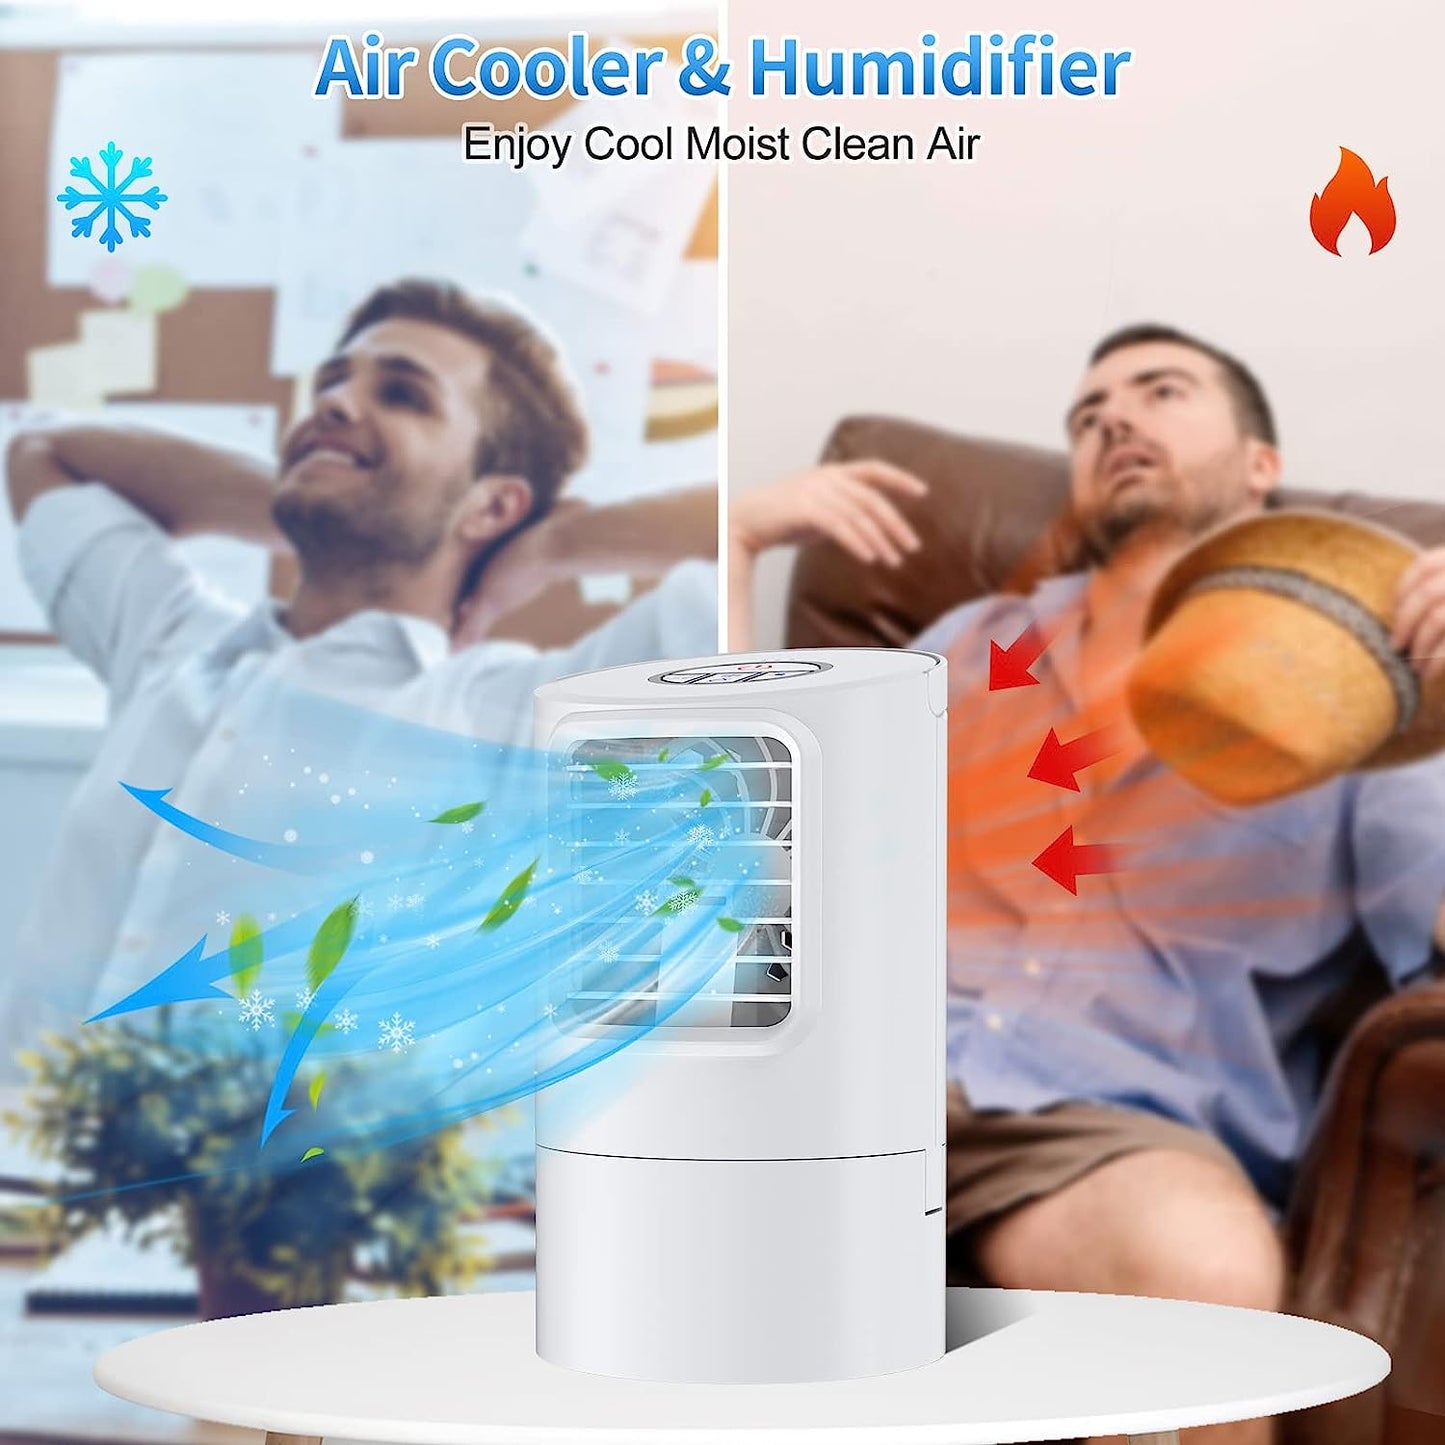 Mobile Air Conditioner, Mini Personal Air Conditioner, 4 in 1 Air Cooler, Fan, Evaporative Cooler, Humidifier, Air Cooler, Portable 3 Wind Speeds and 7 LED Colours (White)